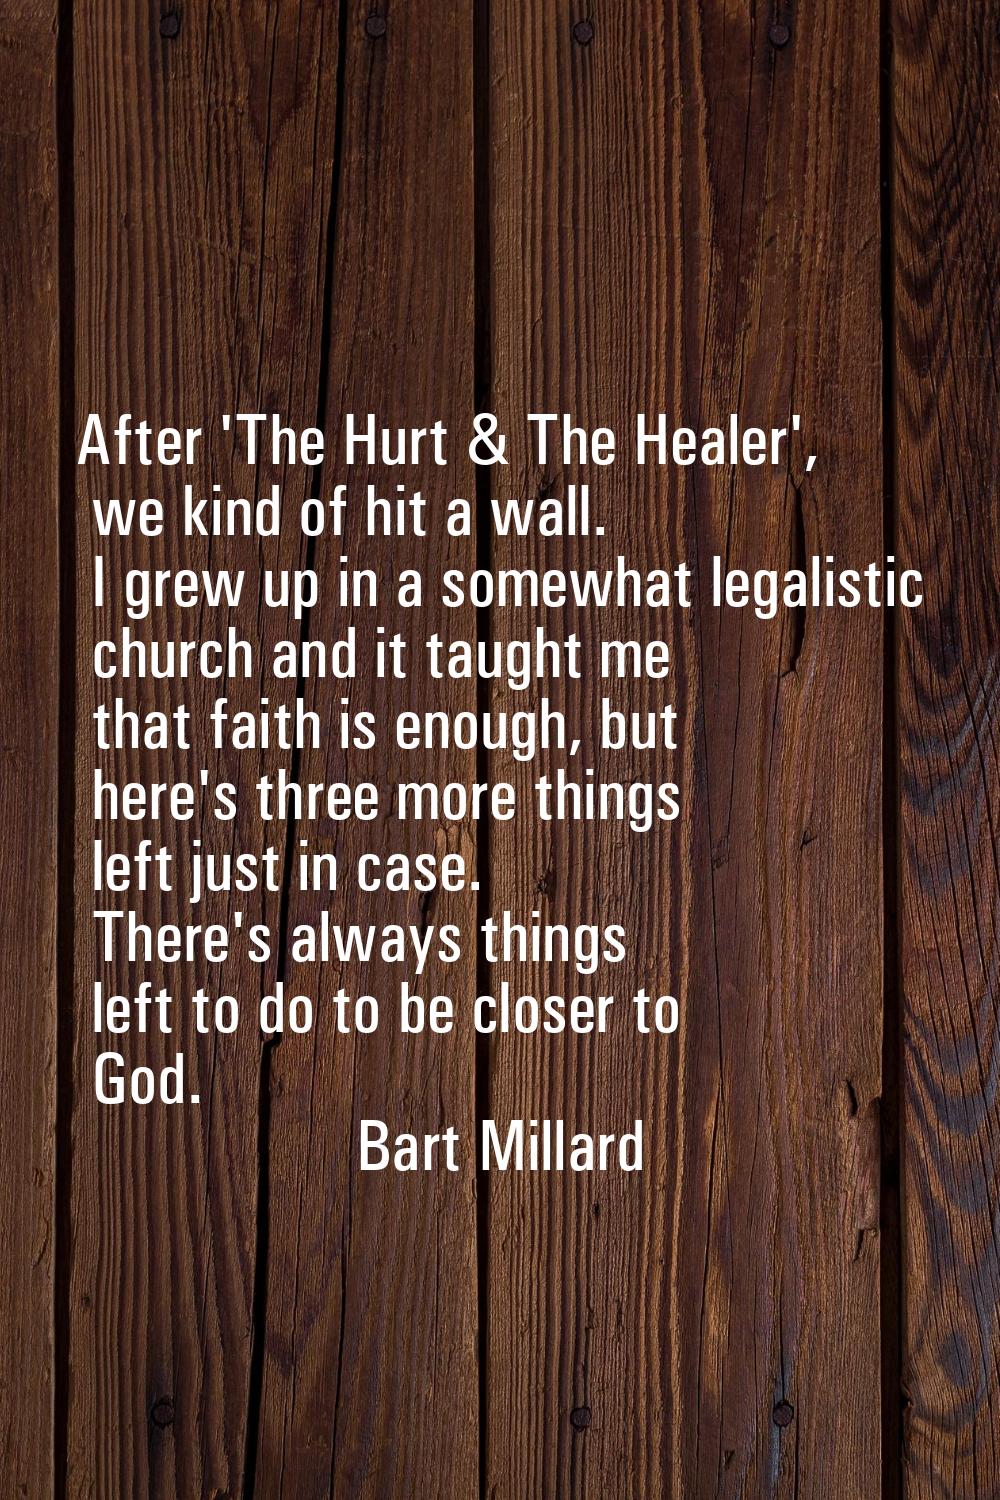 After 'The Hurt & The Healer', we kind of hit a wall. I grew up in a somewhat legalistic church and